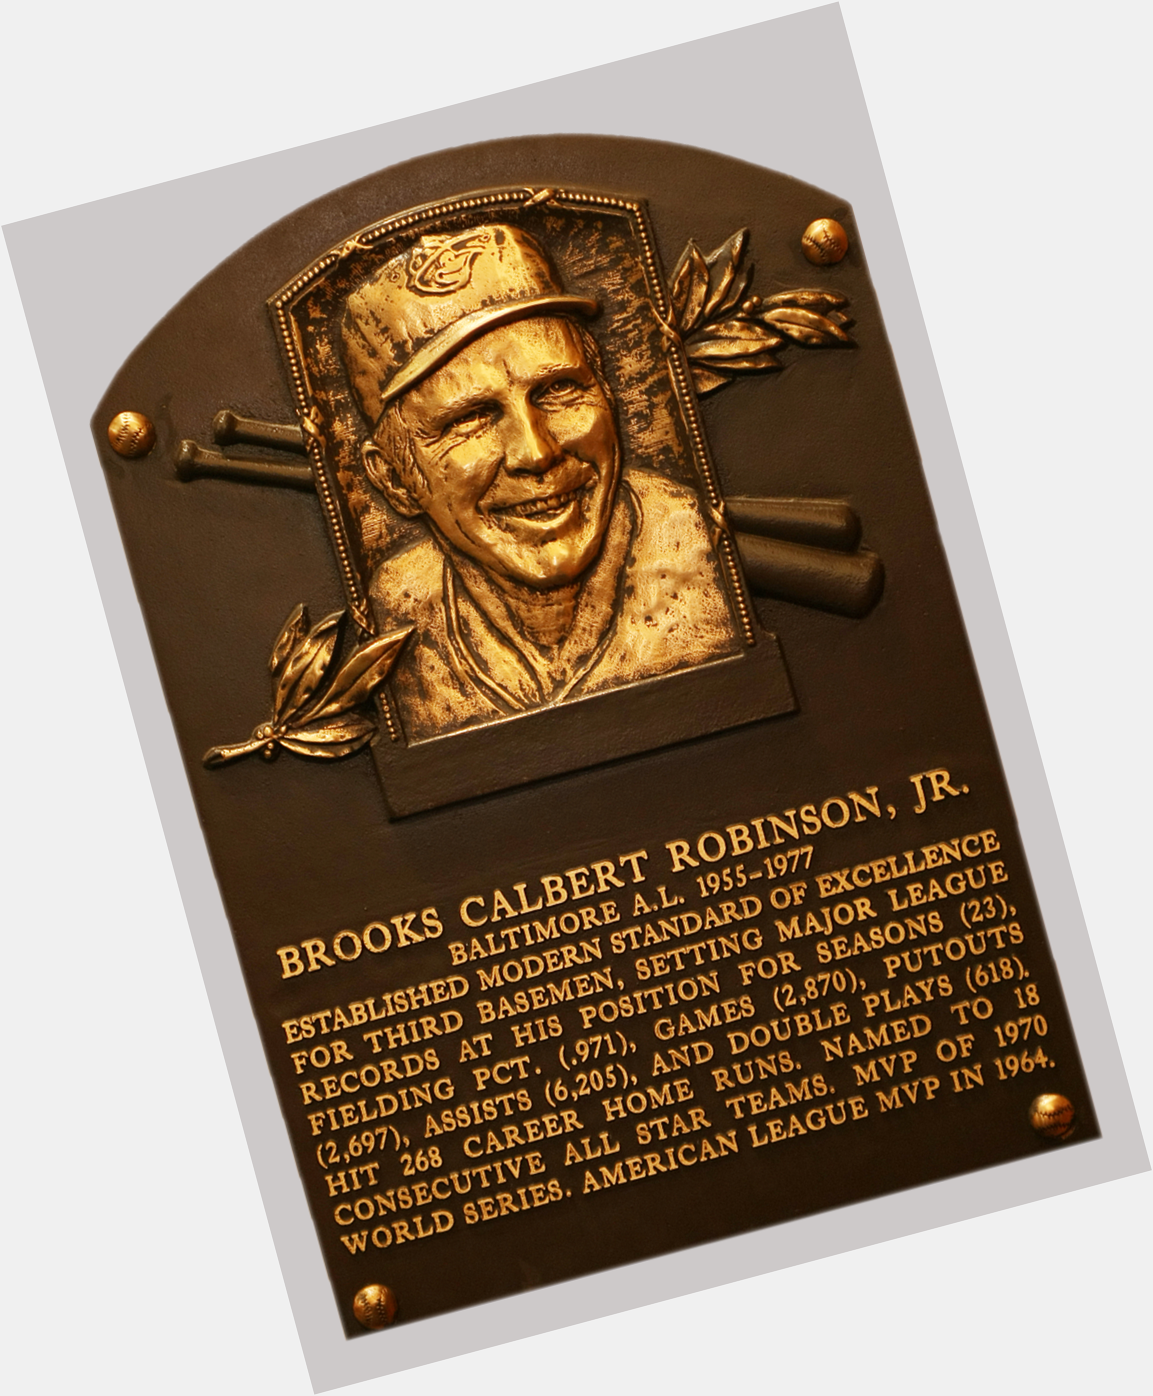    Happy birthday to class personified ~ Brooks Robinson is 78 today :-) 